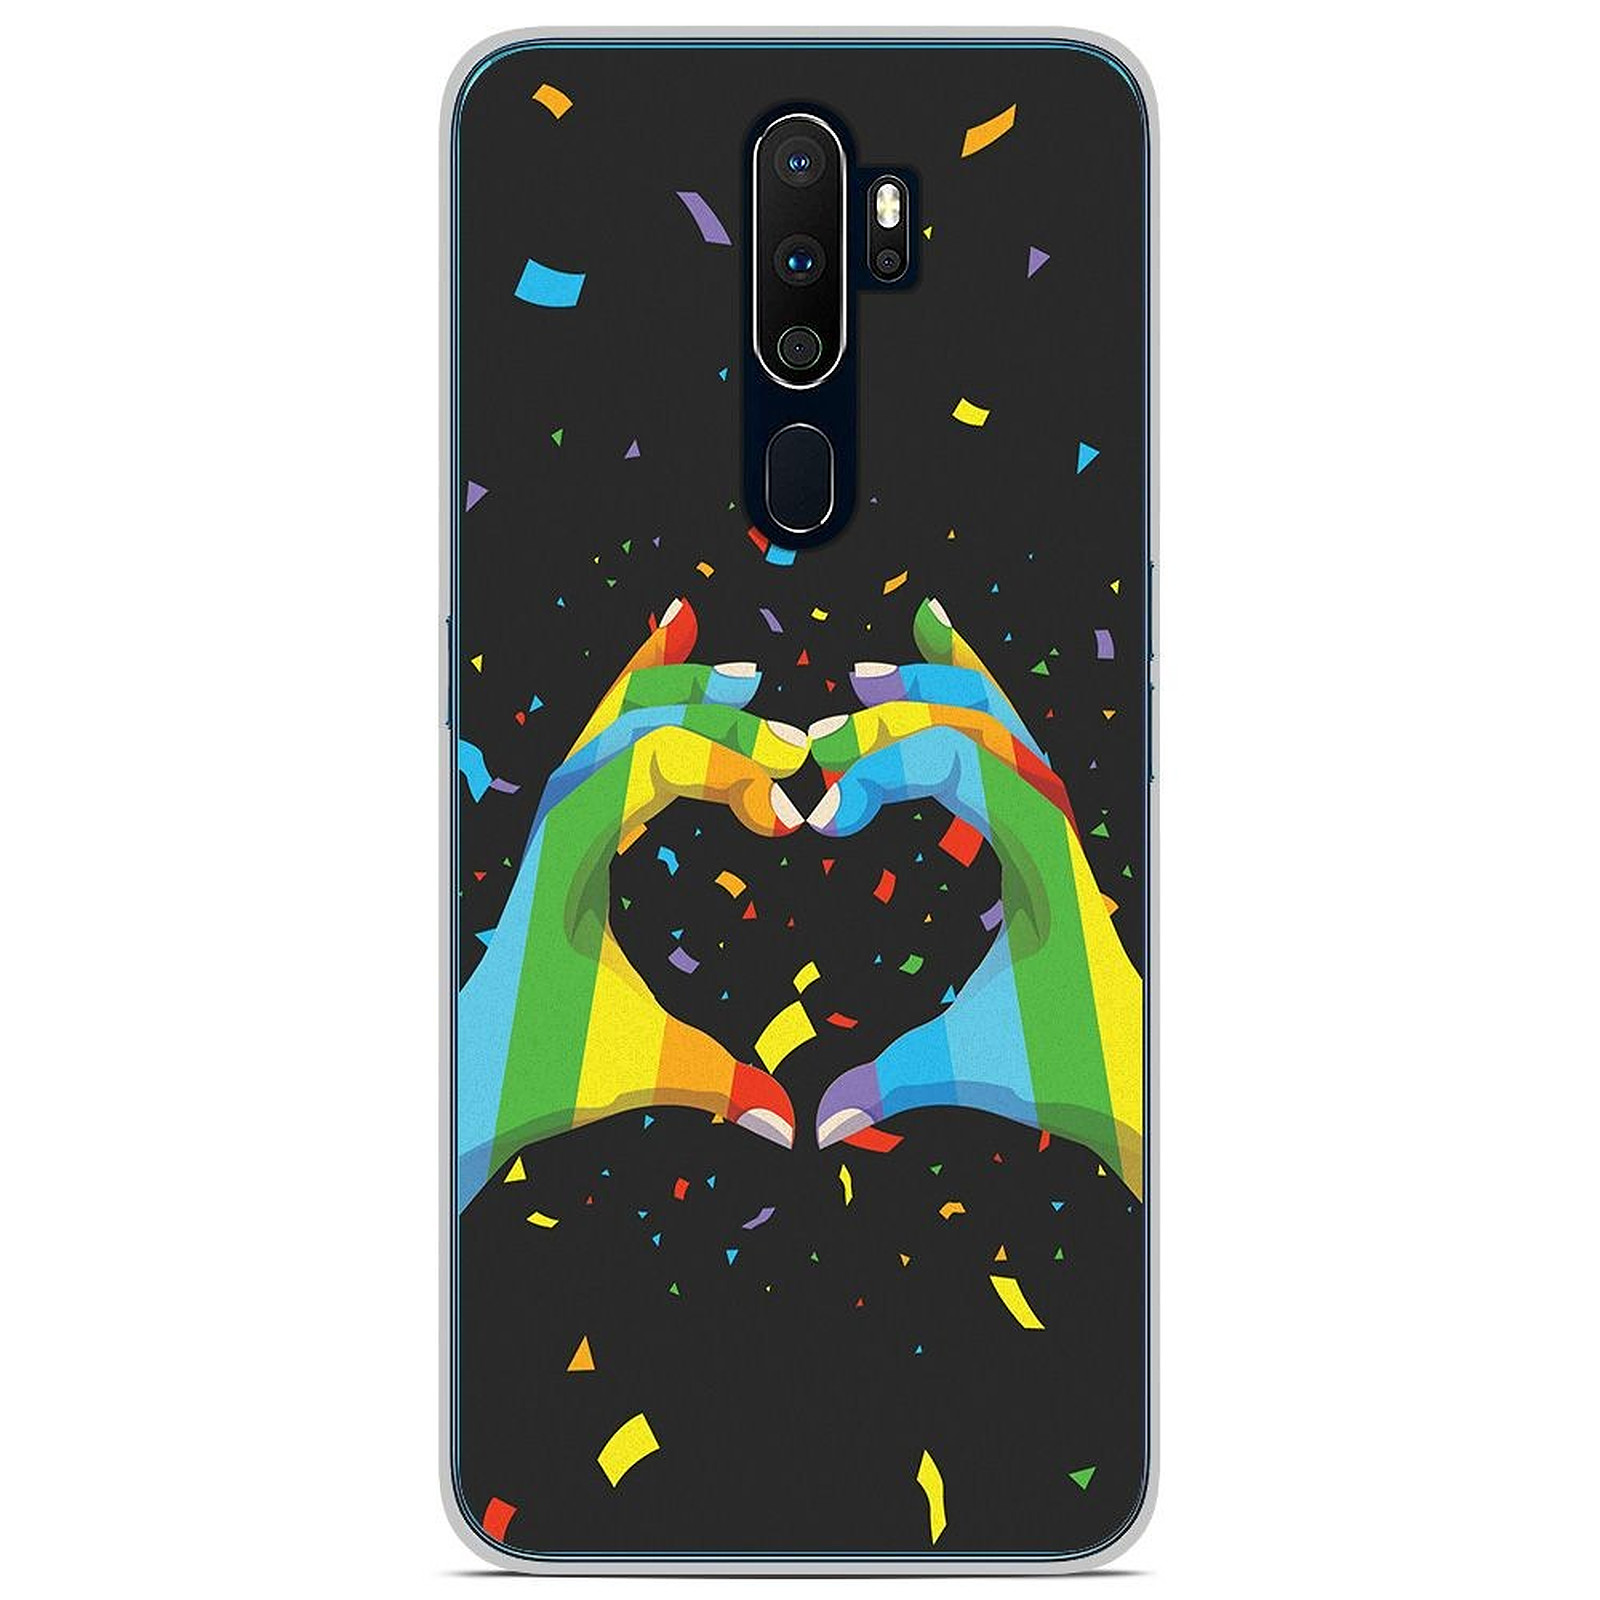 1001 Coques Coque silicone gel Oppo A5 2020 motif LGBT - Coque telephone 1001Coques